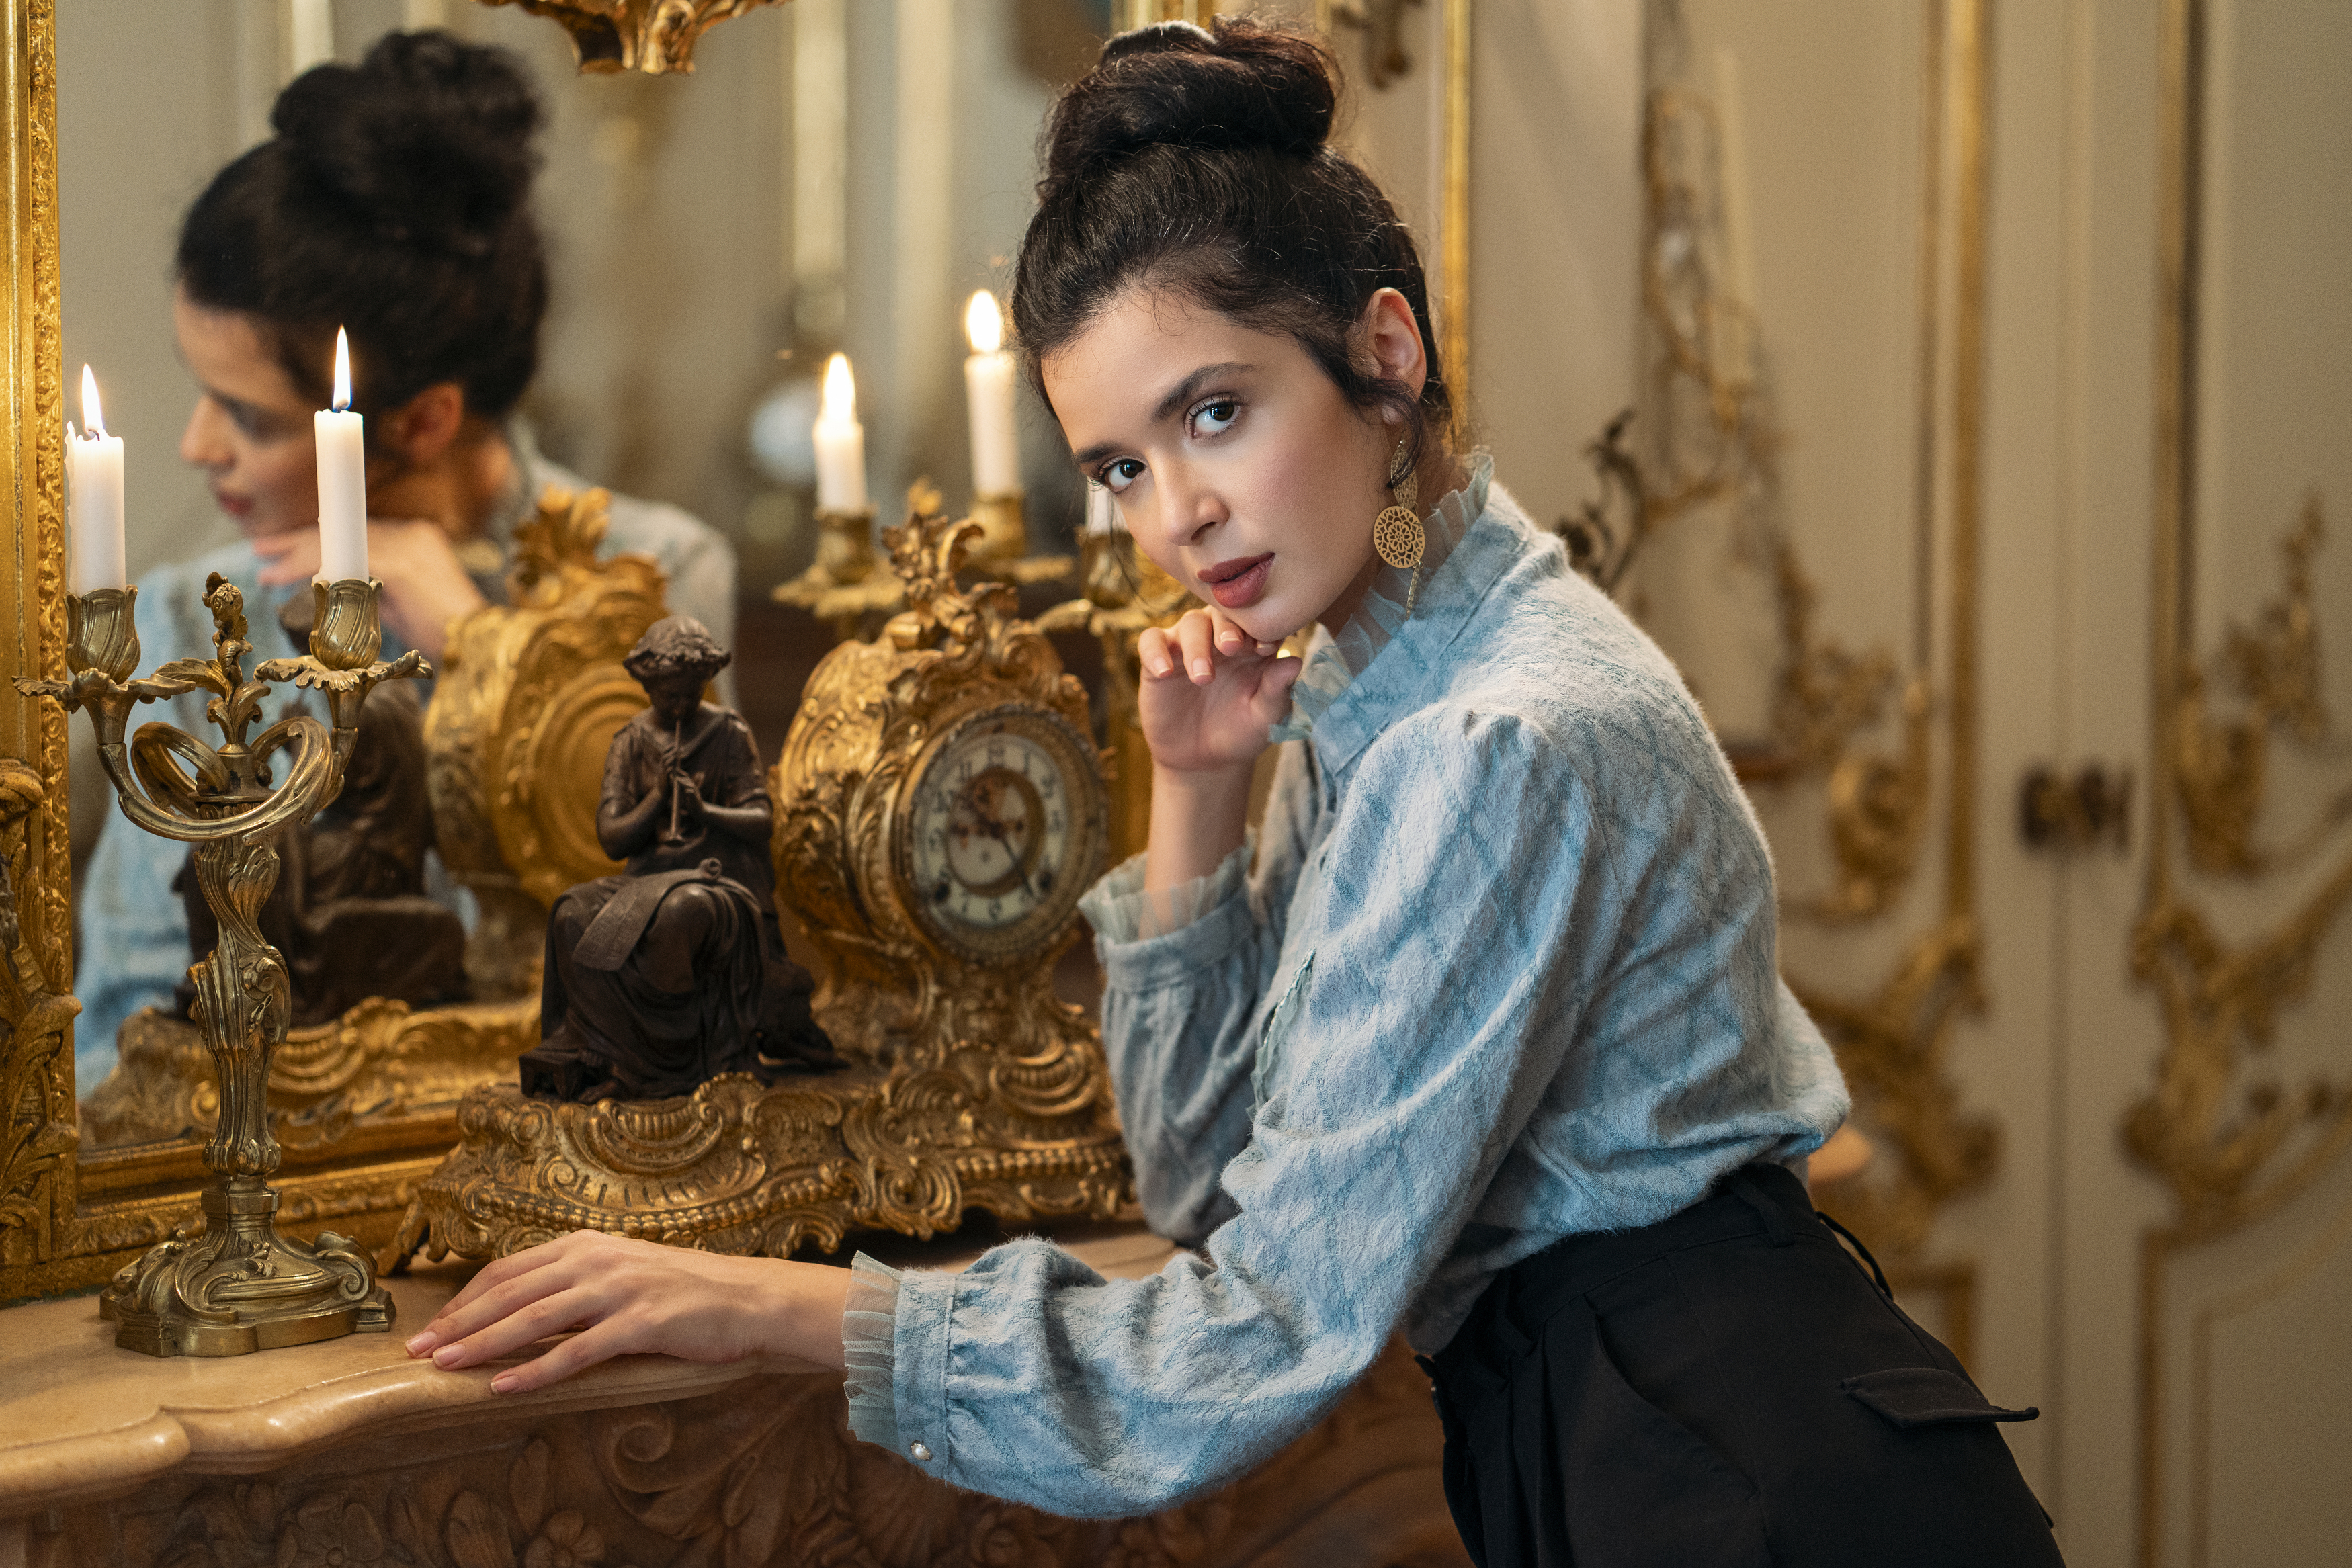 beauty, candles, chandelier, clothing, door, earrings, elegance, fashion, femininity, indoors, lifestyles, looking at camera, louis xv, mirror, one person, portrait, reflections, retro, rococo, sensuality, side view, standing, table clock, vintage, woman, Alex Tsarfin